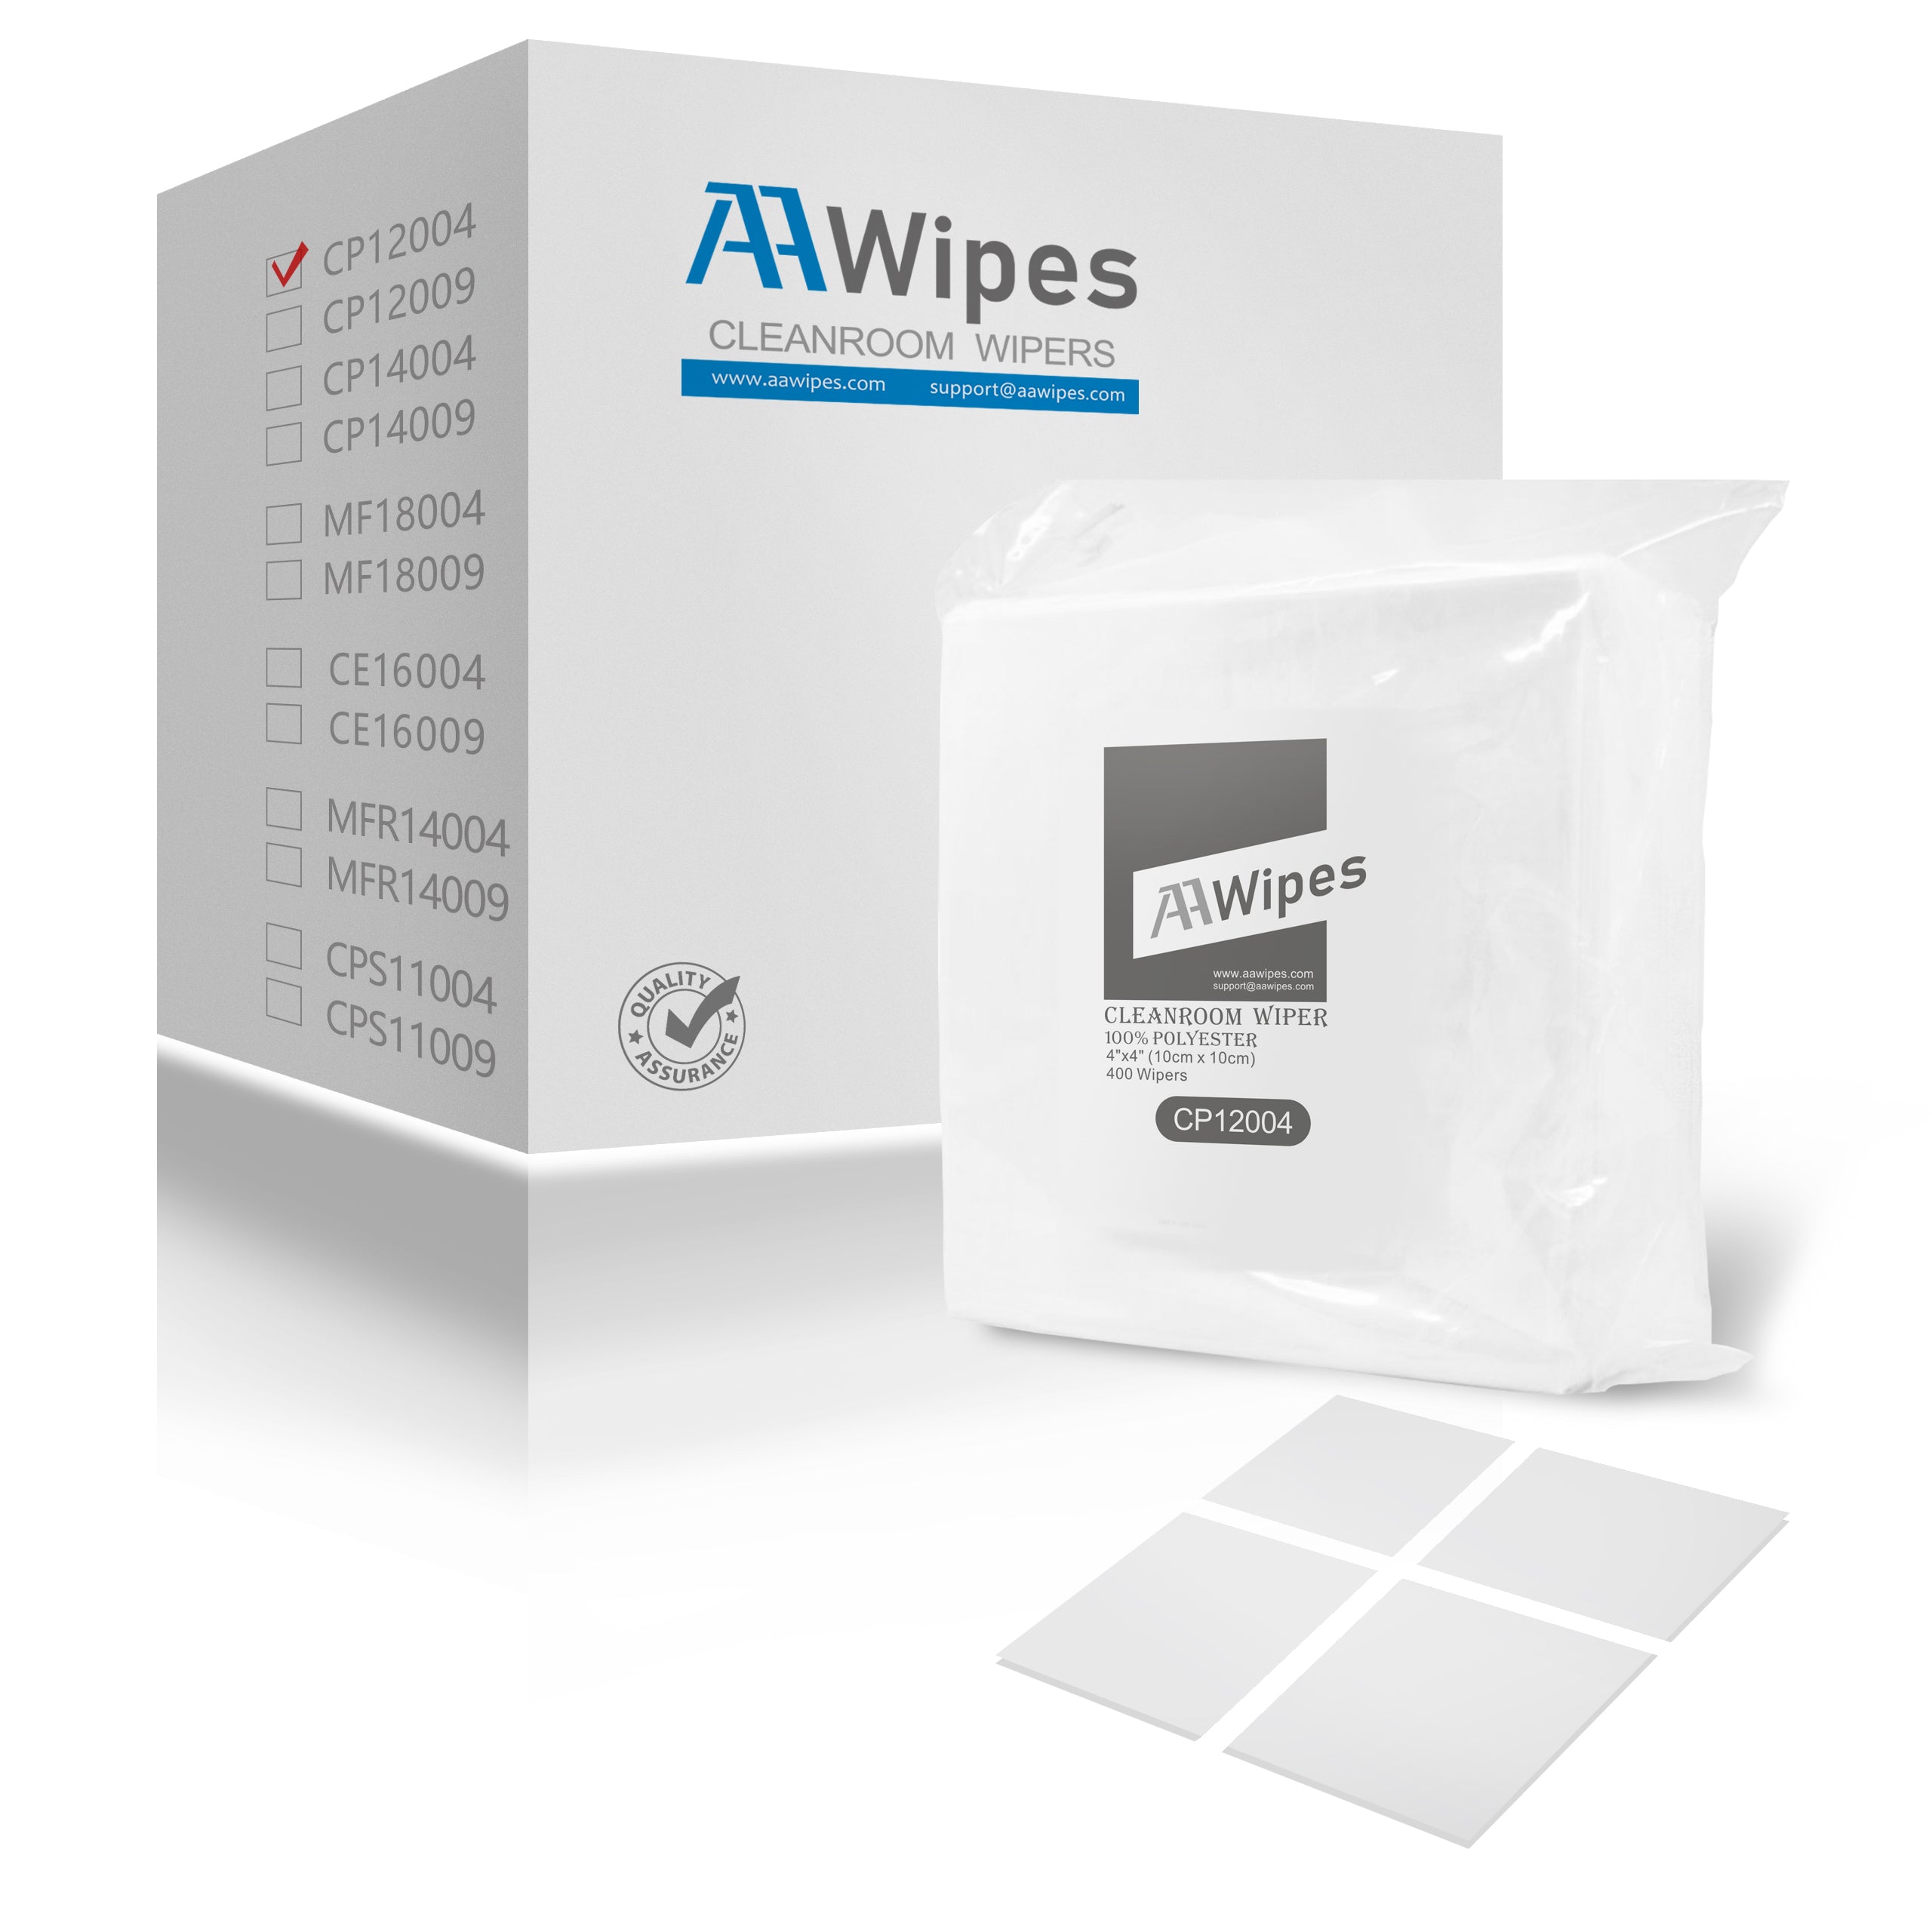 AAwipes Critical Environment Wipes: 4"x4" Double Knit, 100% Polyester. Pharmaceutical-grade, delicate task wipes. 8,000 wipes/box, 20 bags (No. CP12004).